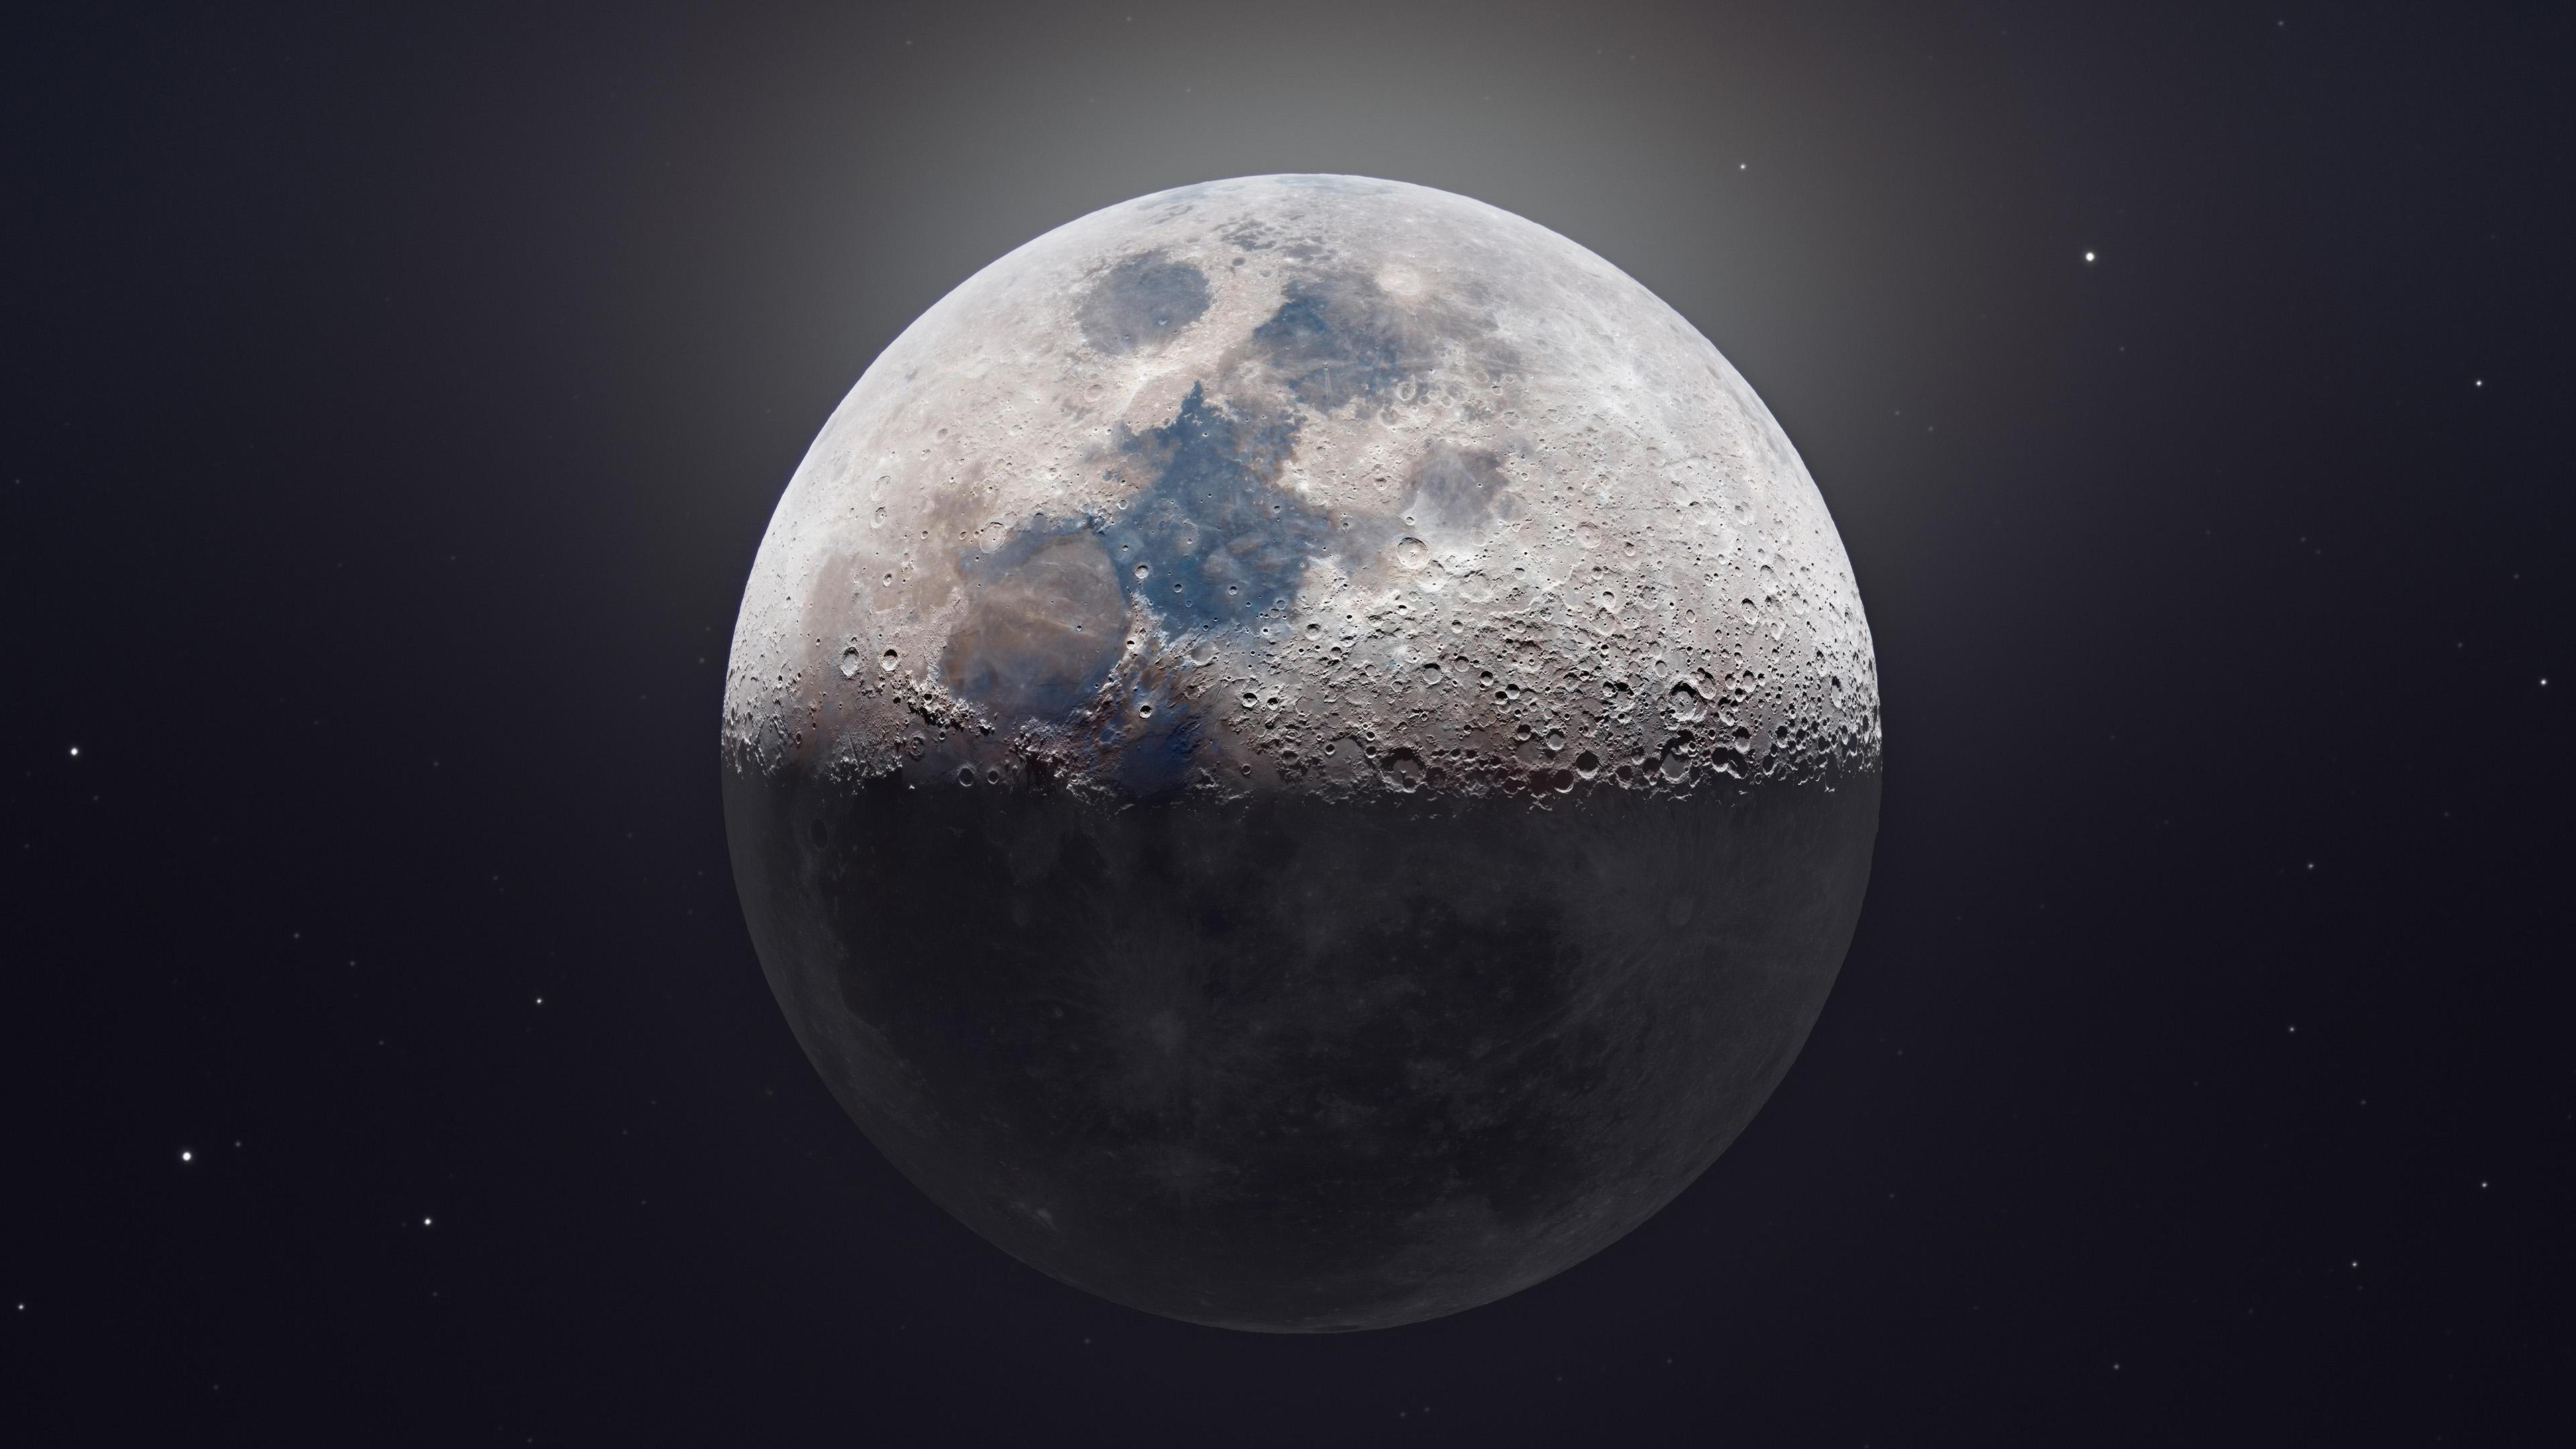 Moon 4K wallpaper for your desktop or mobile screen free and easy to download